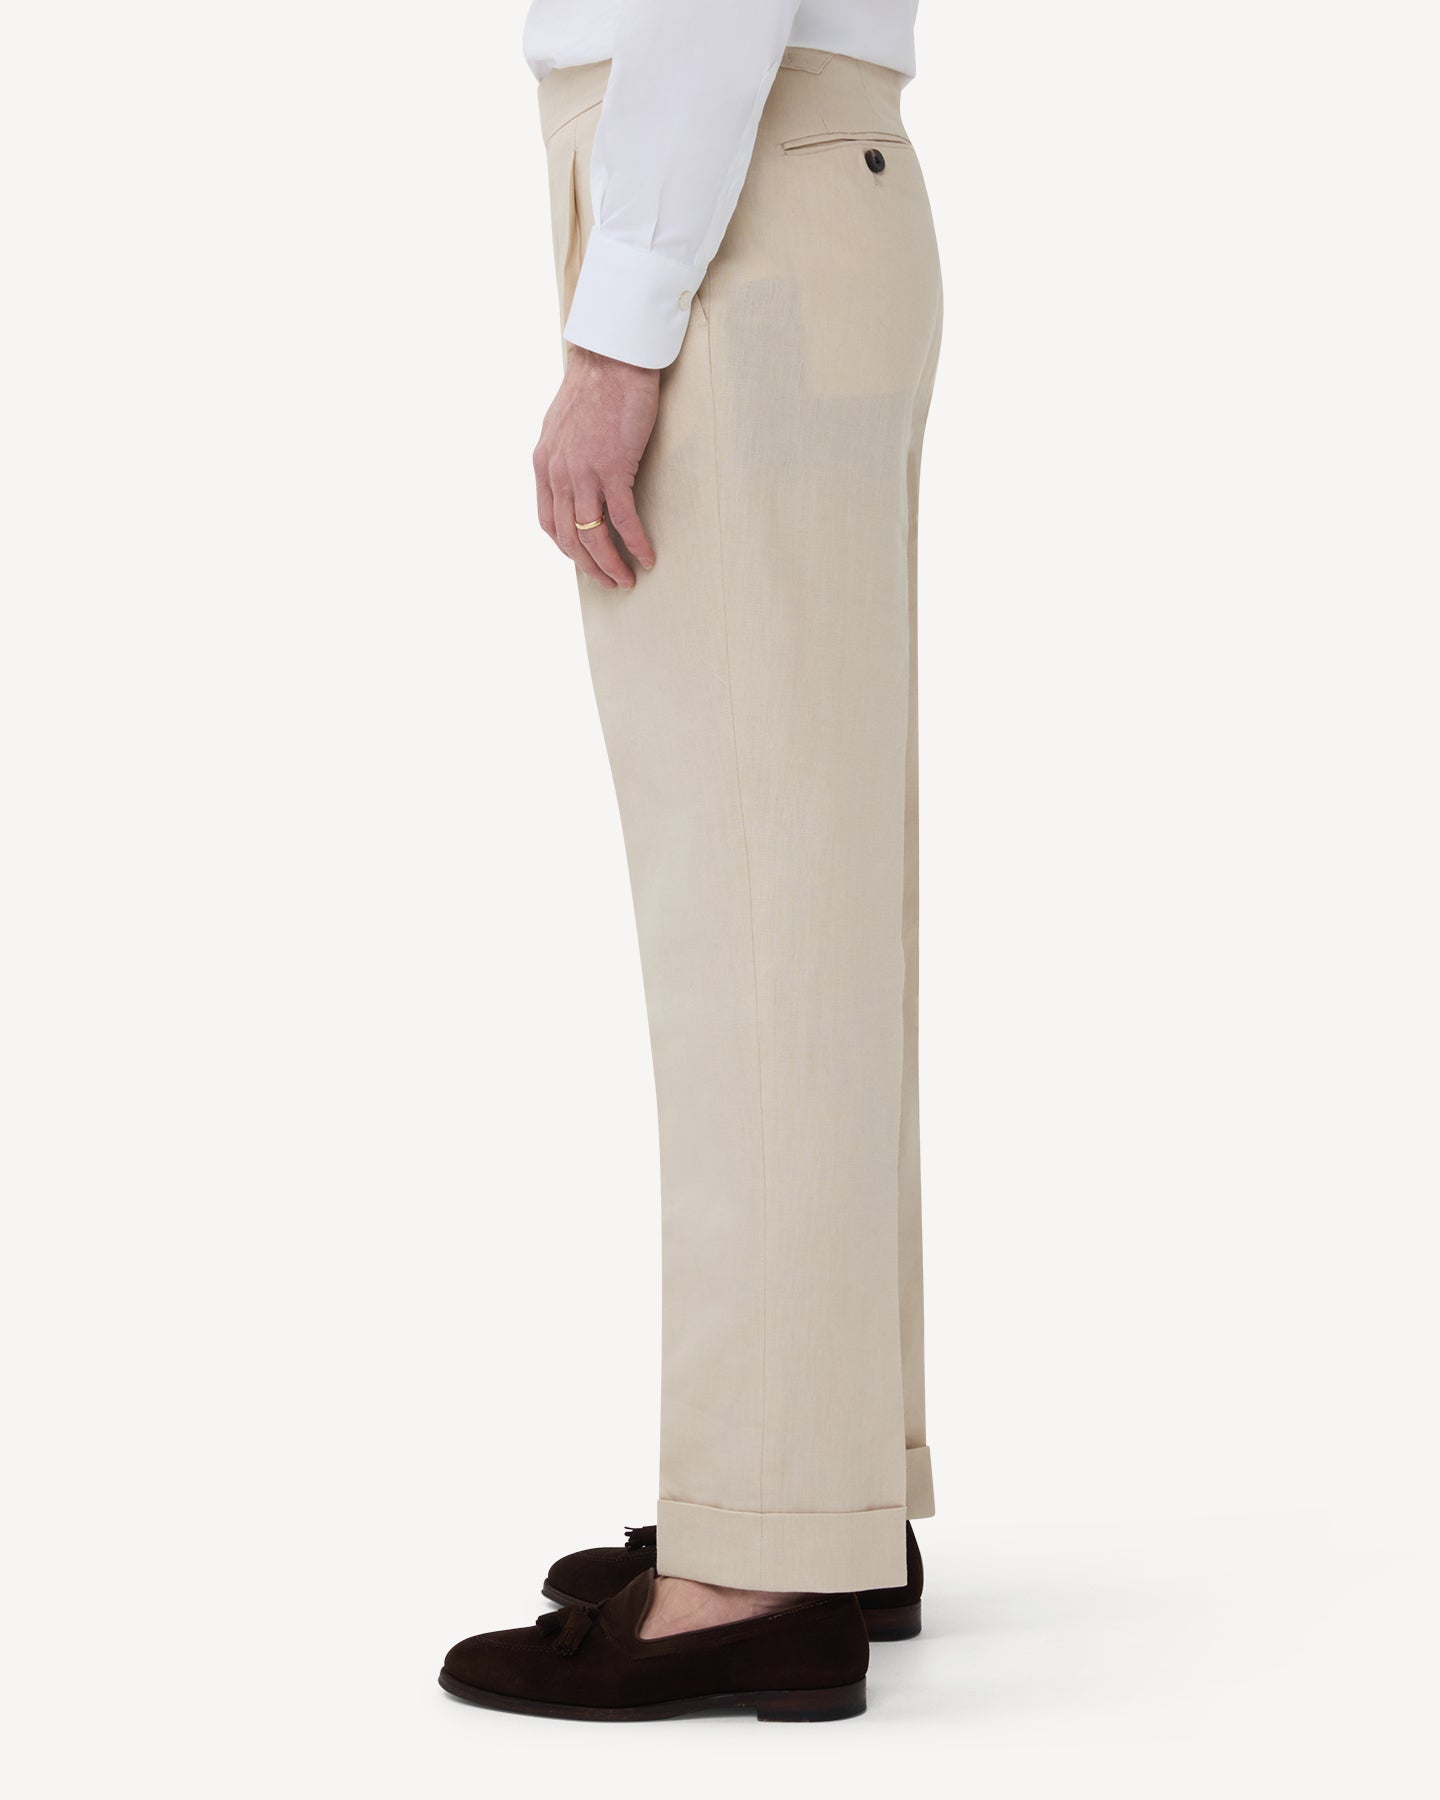 The side of stone linen trousers with single pleats and side adjusters